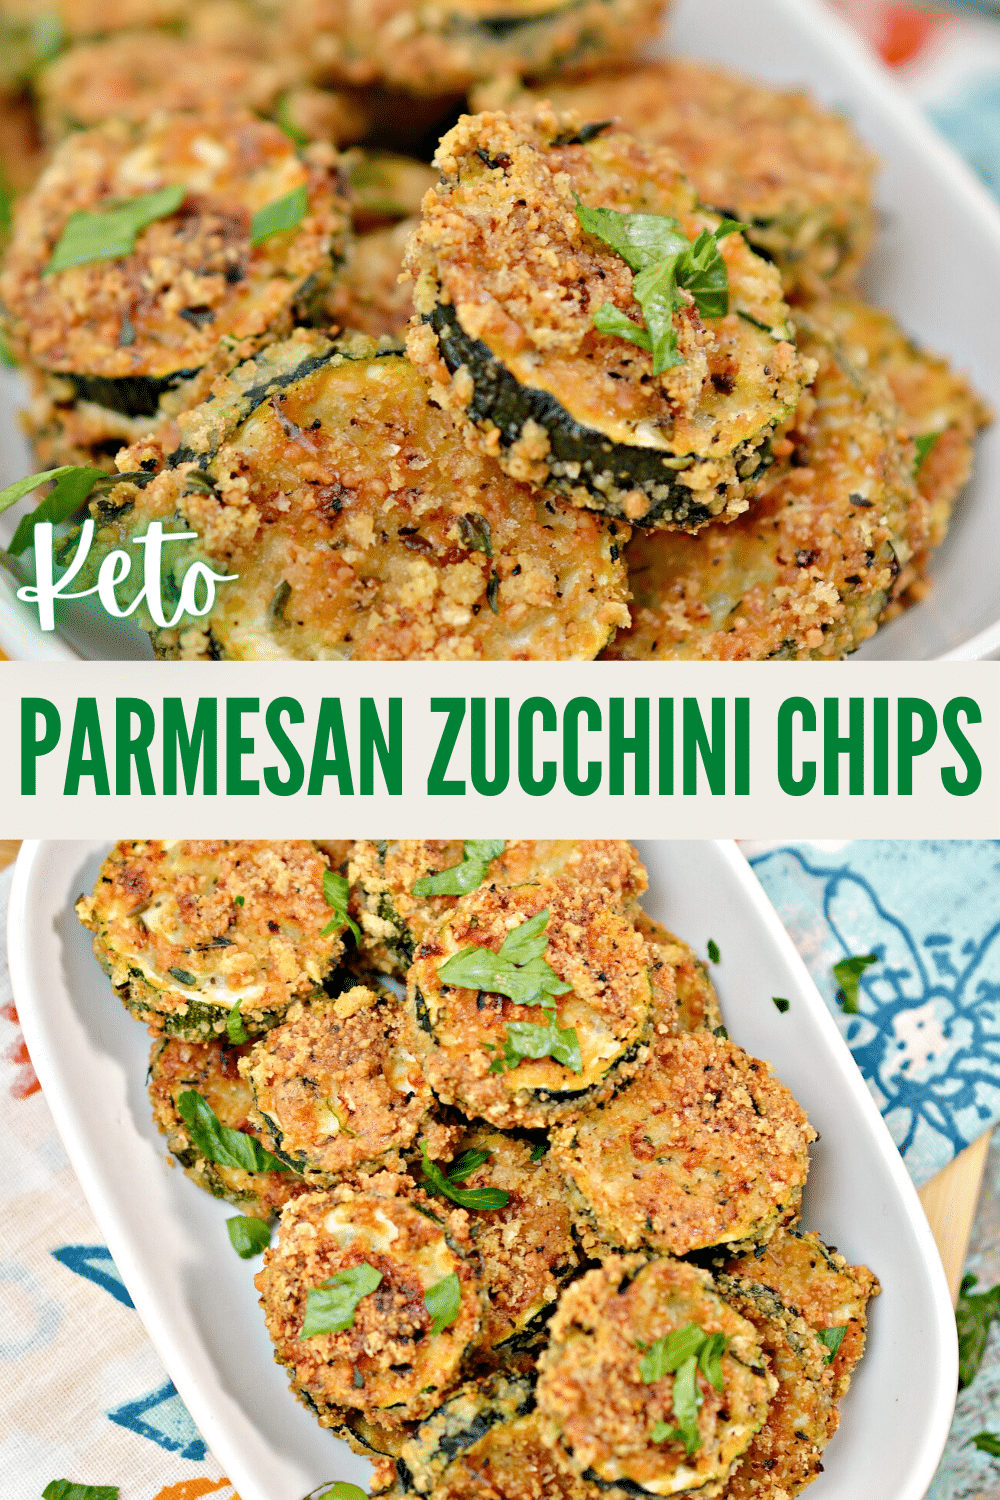 These Keto Parmesan Zucchini Chips are low carb and delicious. A great way to use up extra zucchini and works as an appetizer or side dish. #zucchini #keto #lowcarb via @wondermomwannab